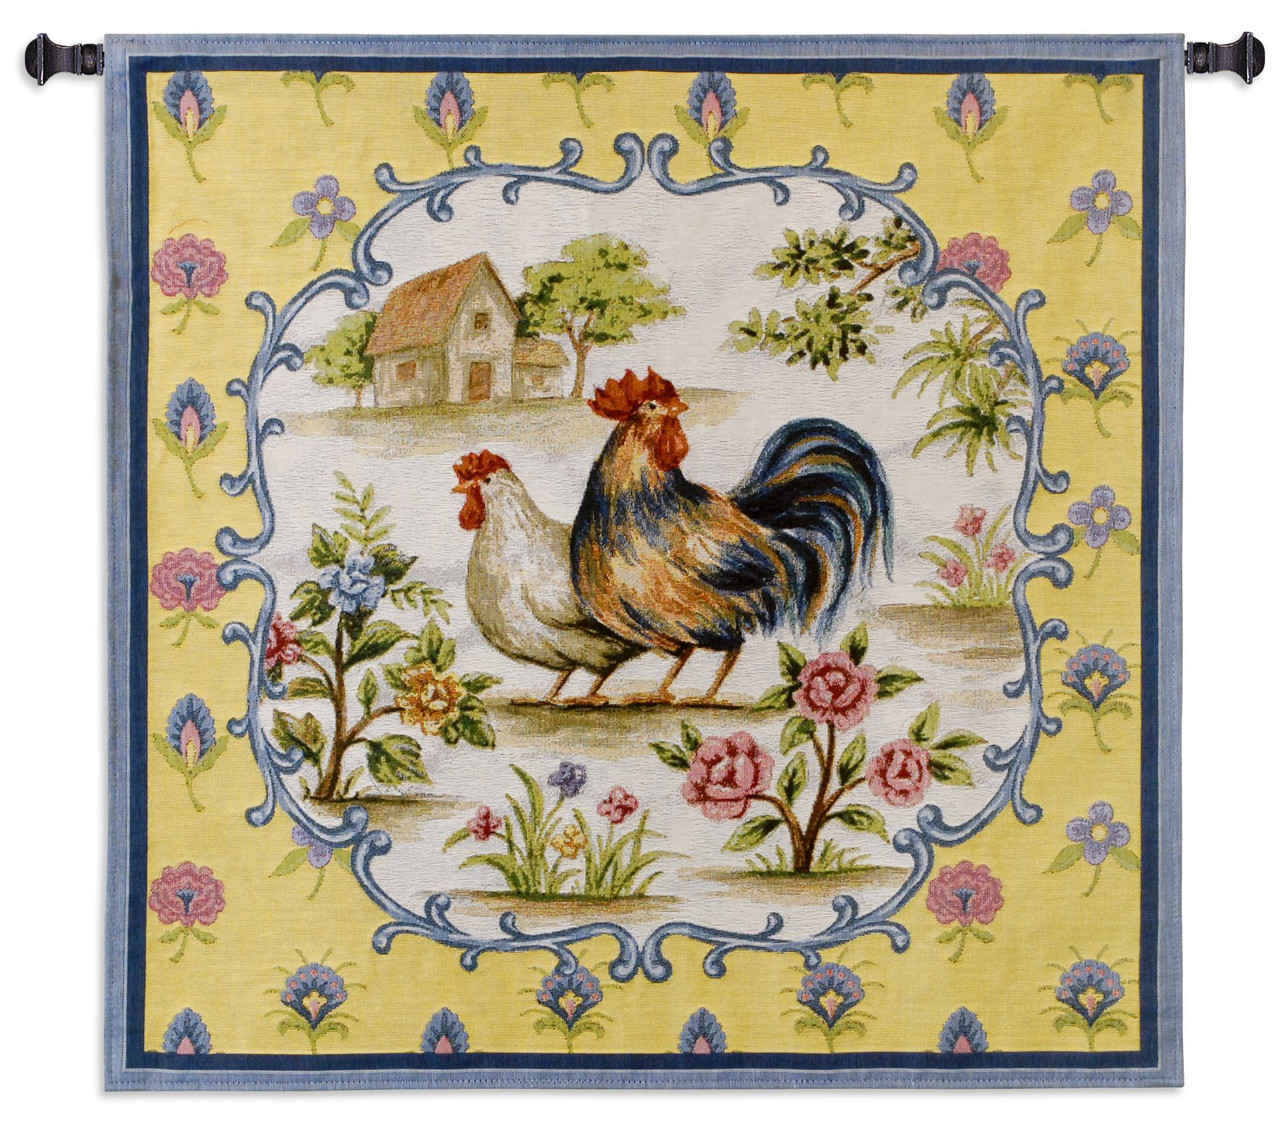 The Rooster's Store at  Pocket Cross & The